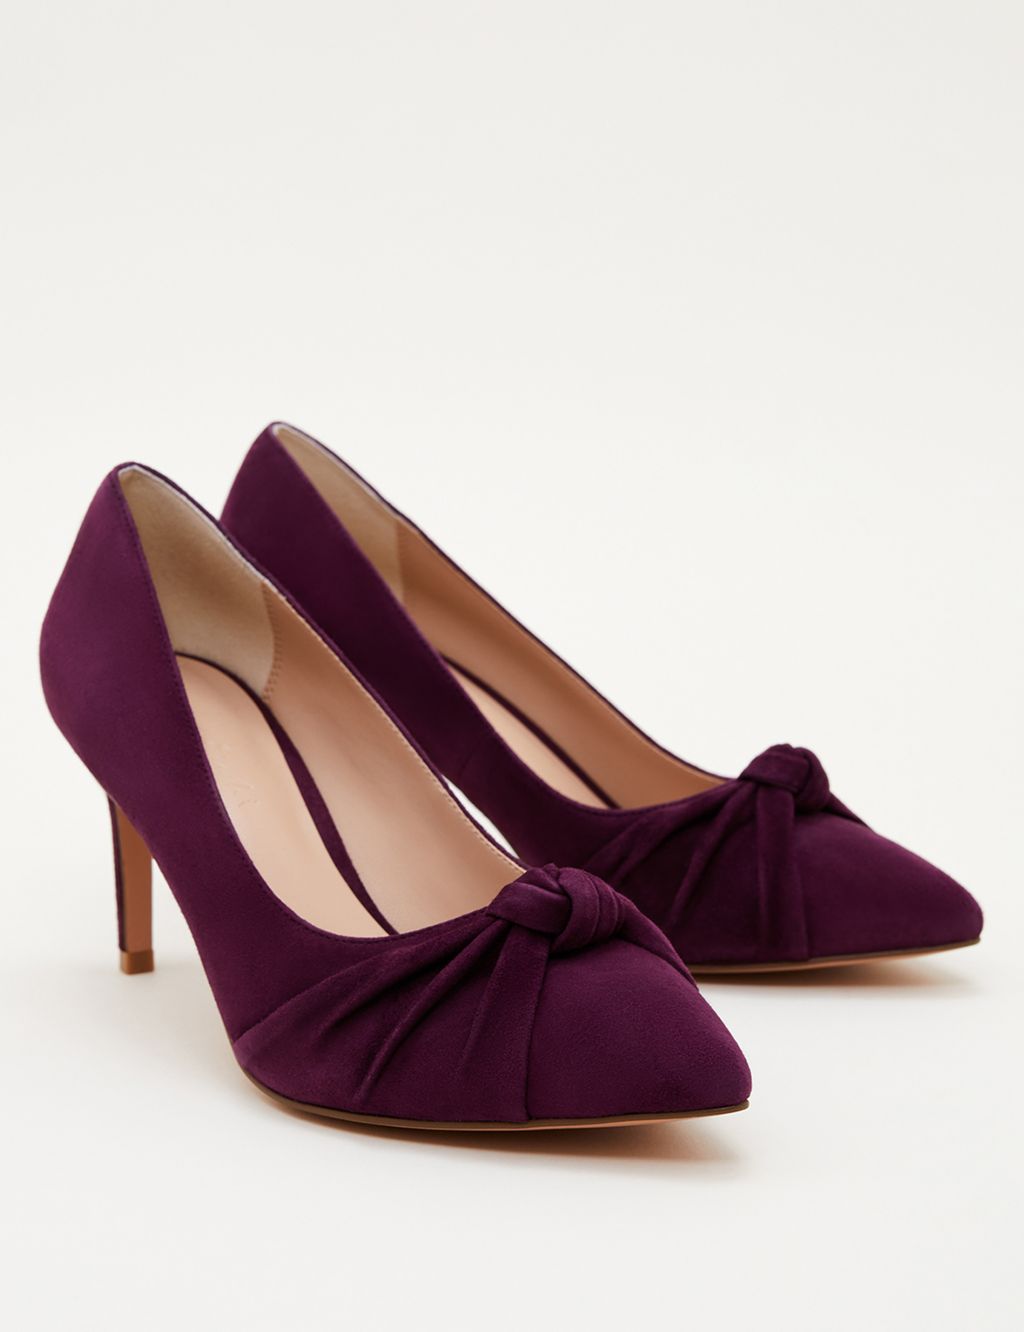 Suede Stiletto Heel Pointed Court Shoes image 2